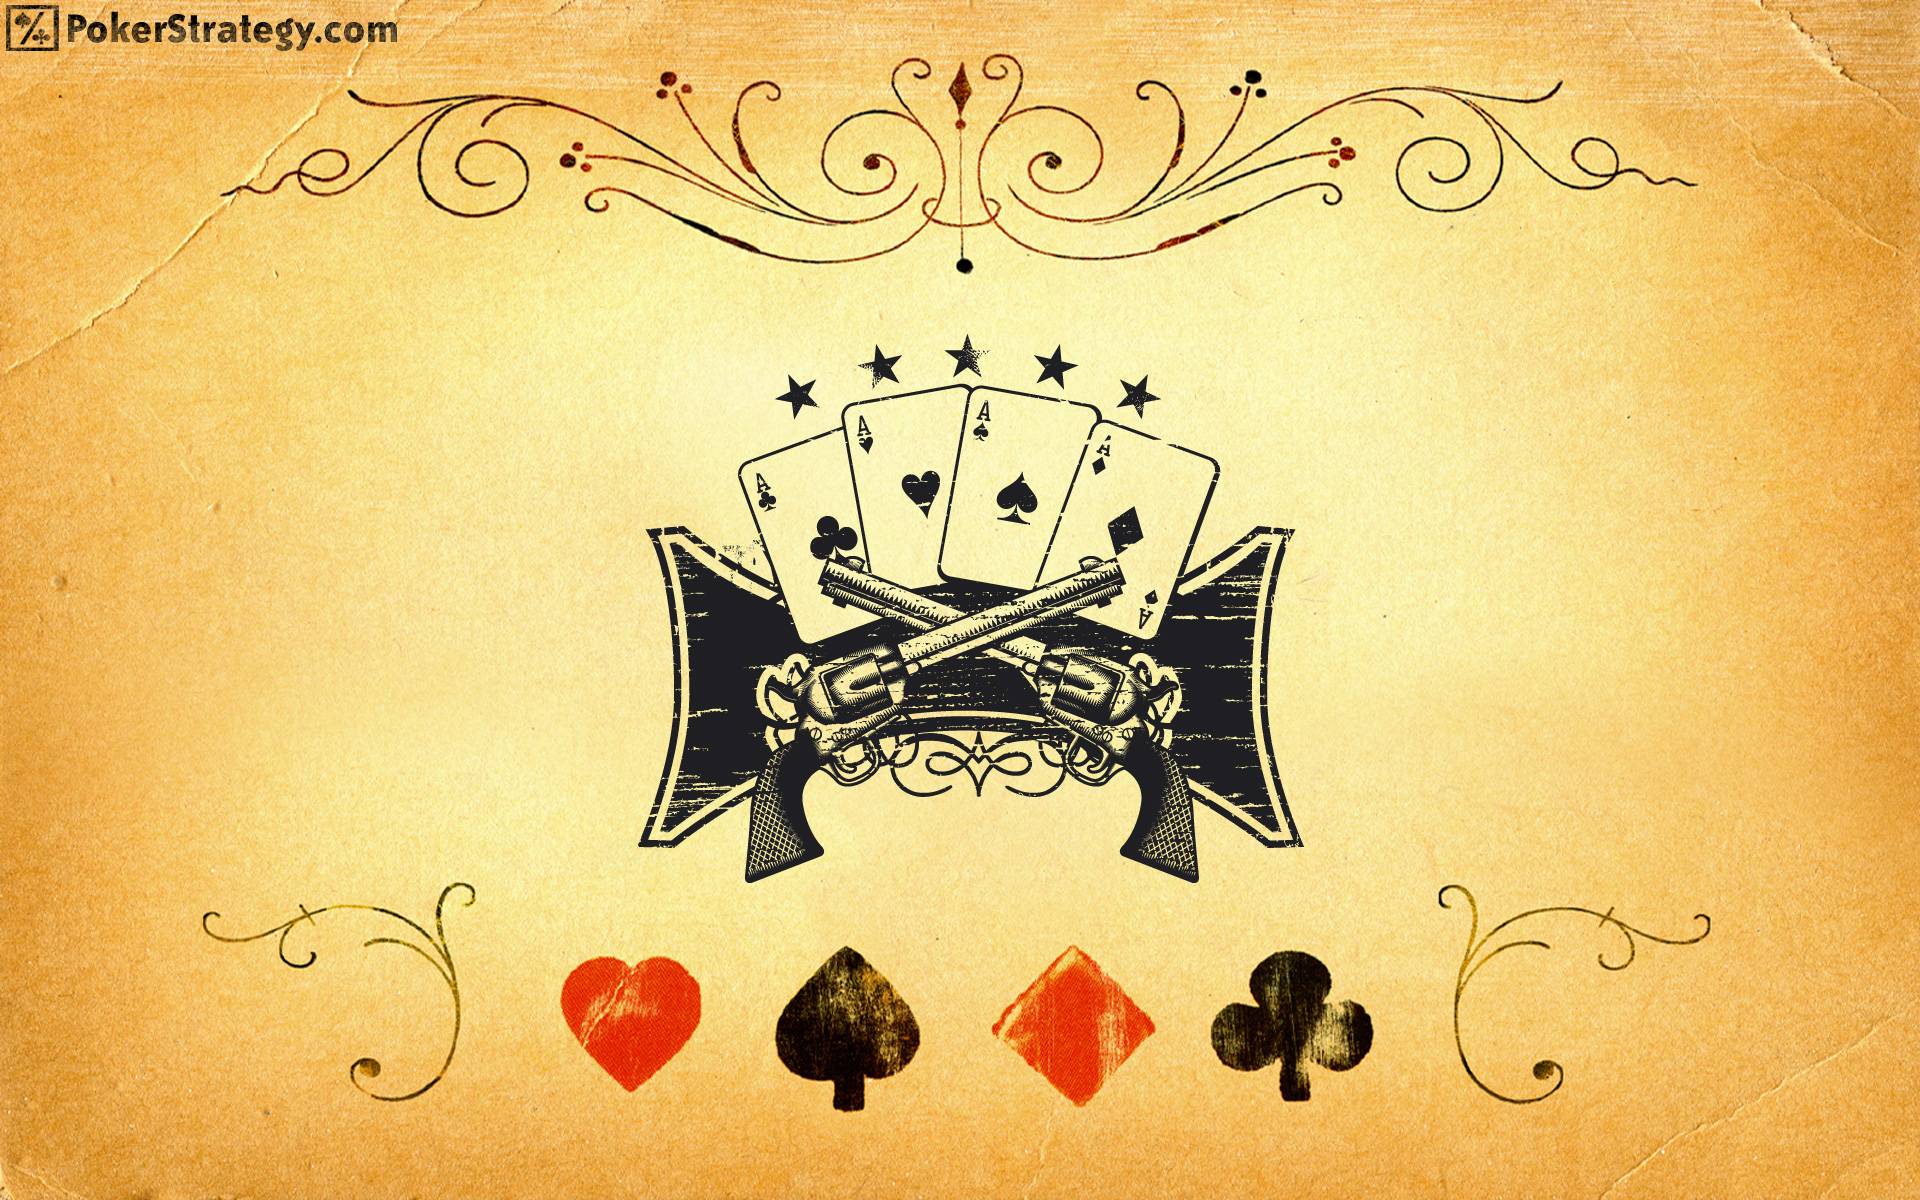 Pictures Of Poker Hd, 1920x1200, November 17, - Western Facebook Cover - HD Wallpaper 